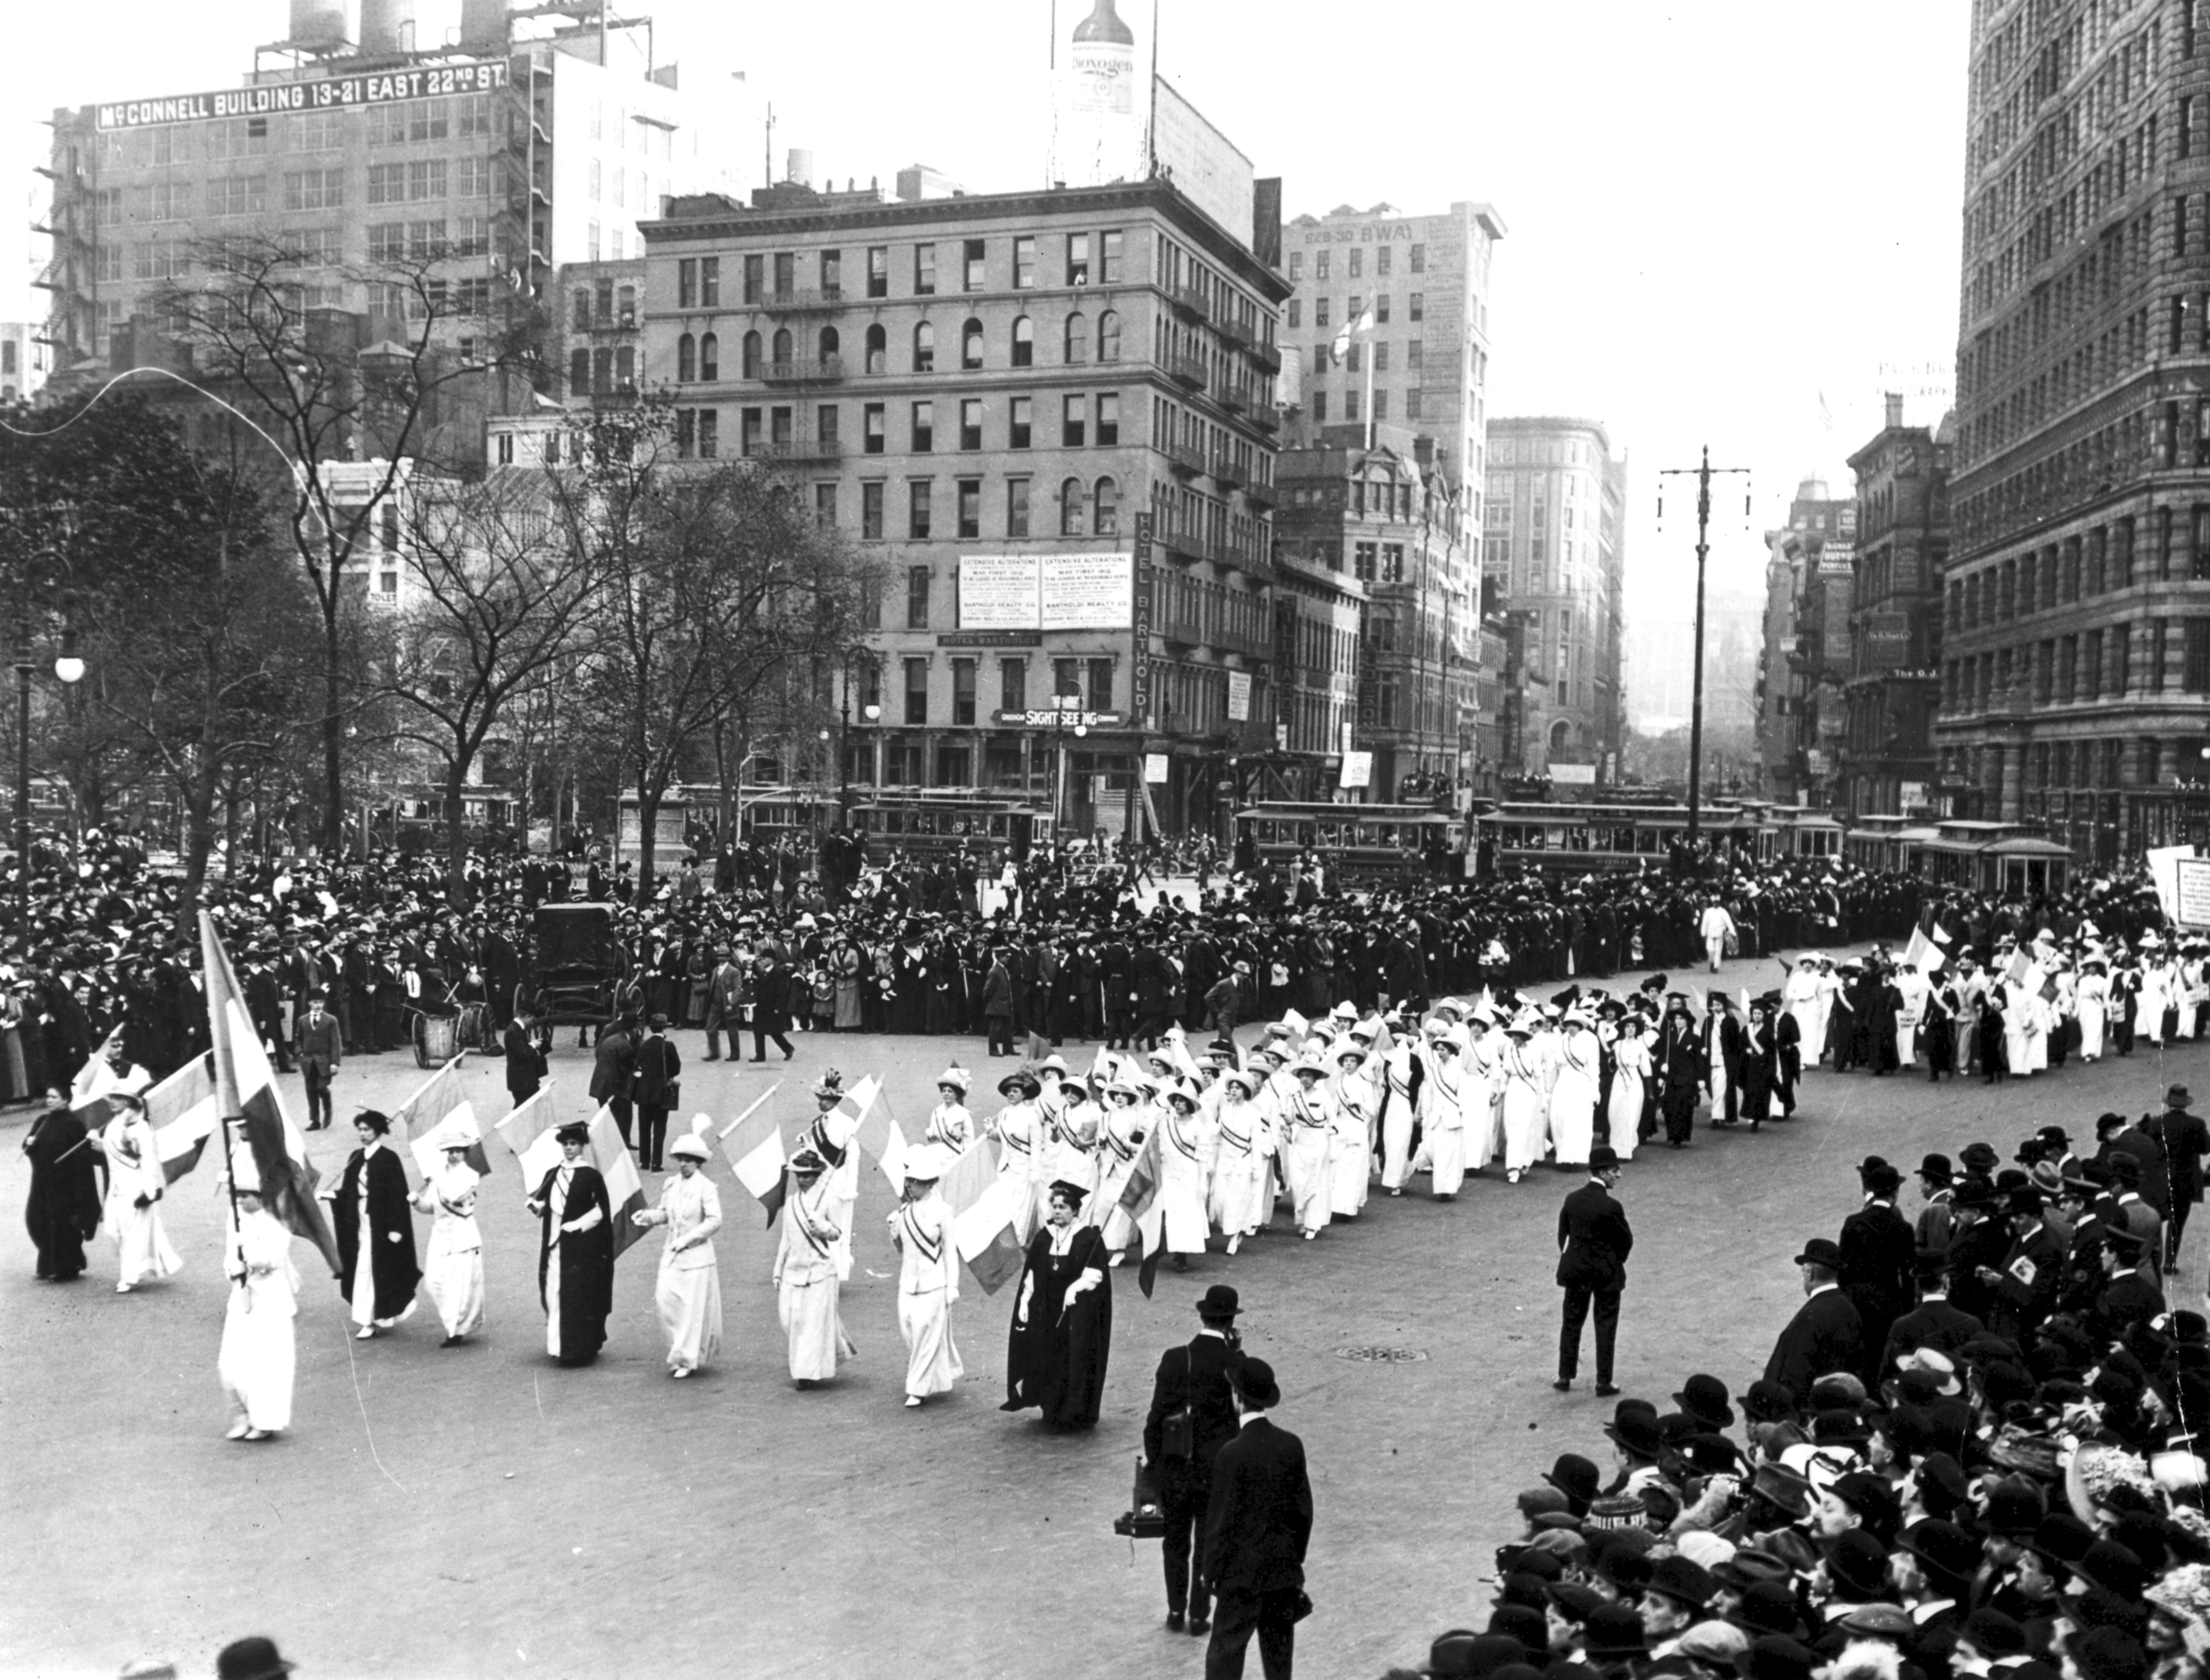 View of a suffrage march on Fifth Avenue, off Broadway and 23rd street, in New York City, 1912. (Getty Images)